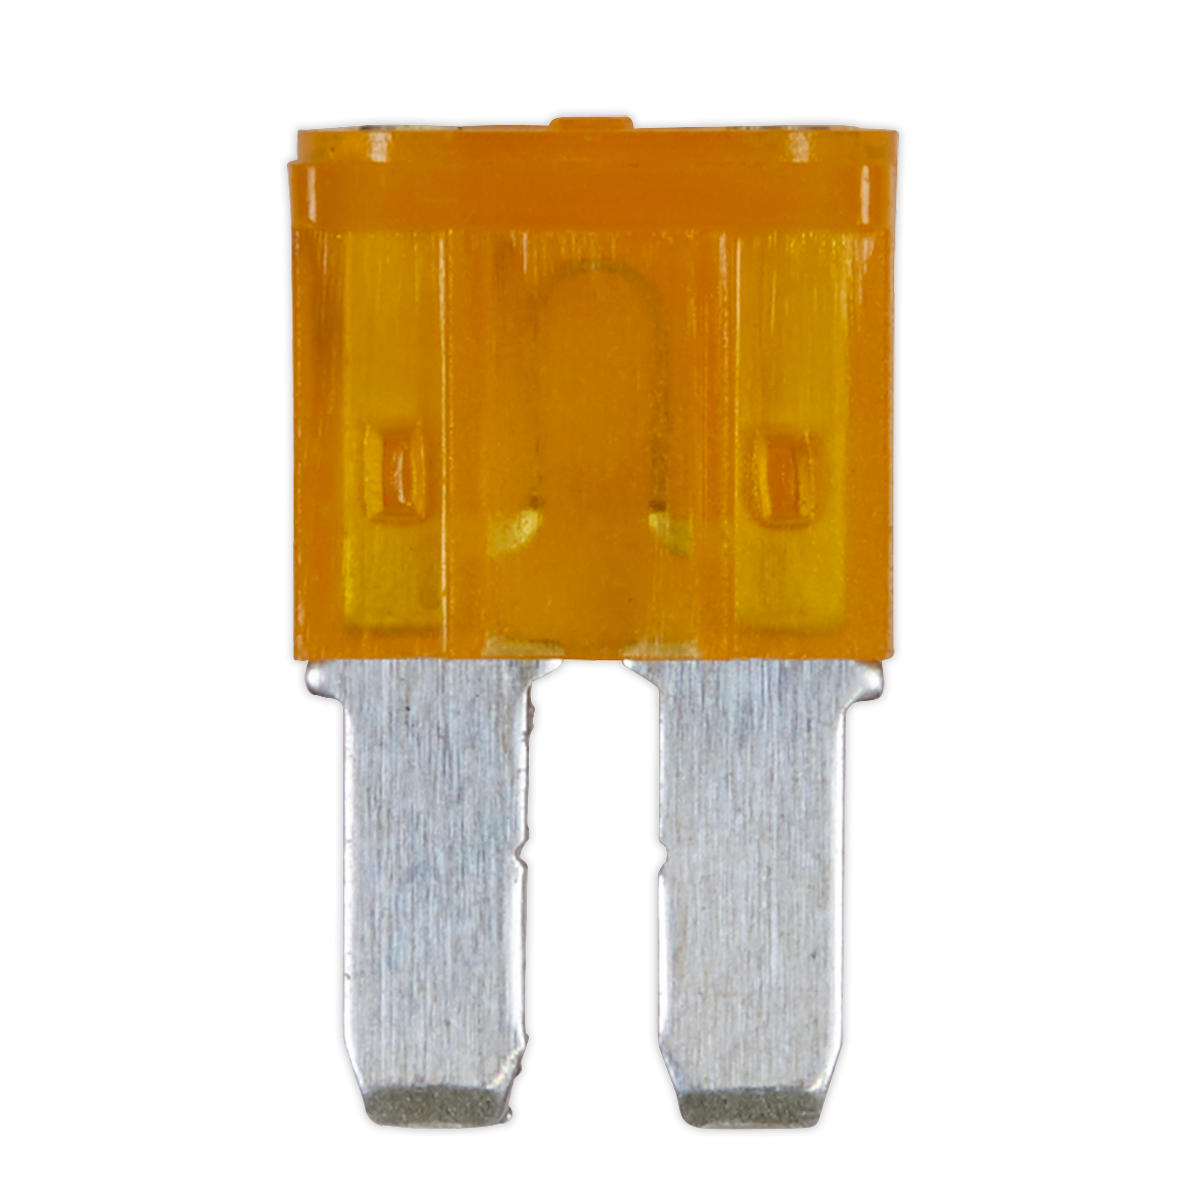 Automotive MICRO II Blade Fuse 5A - Pack of 50 - M2BF5 - Farming Parts